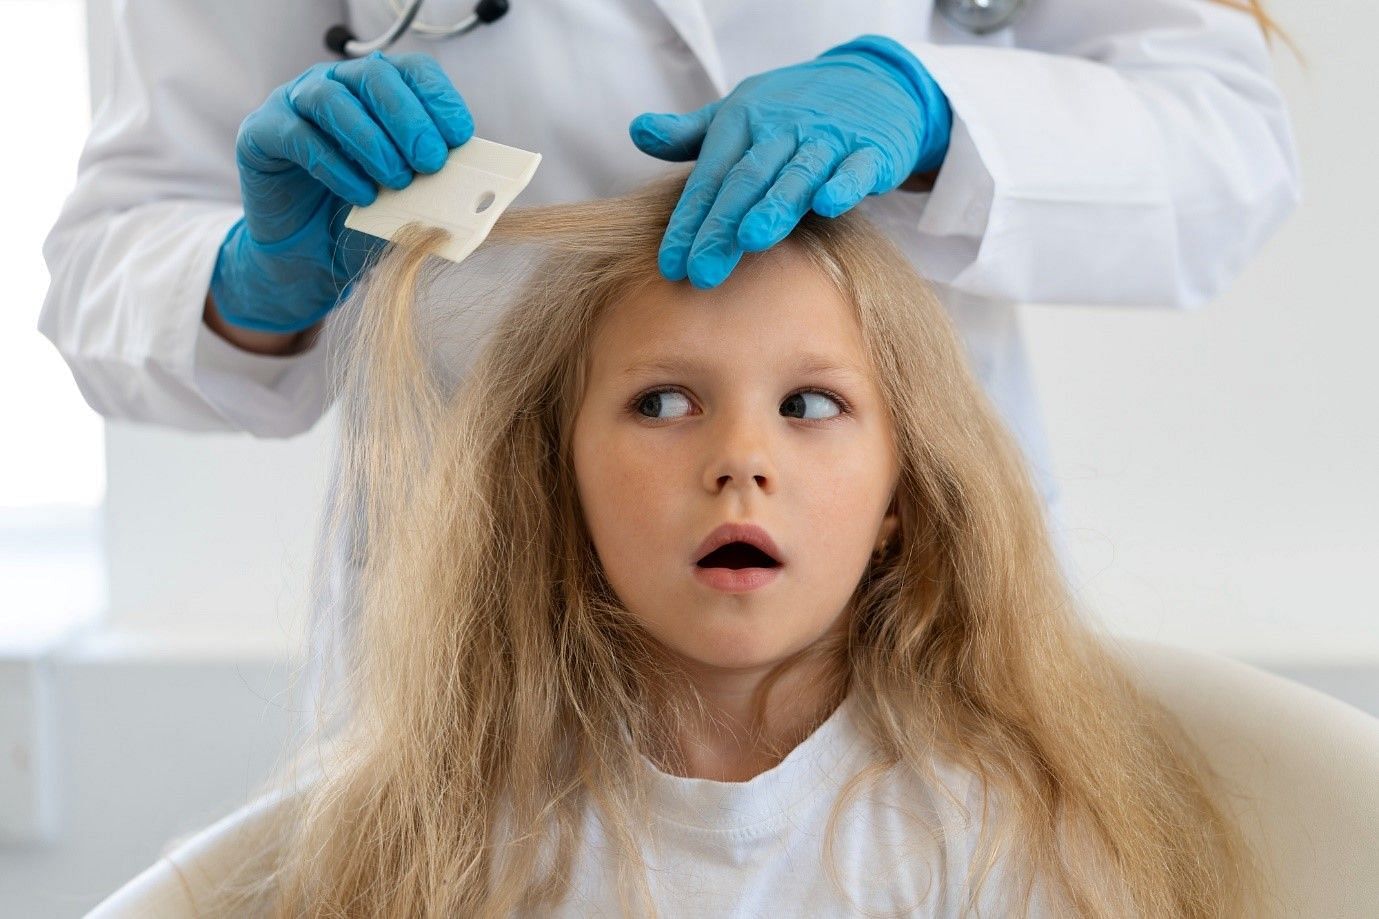 Lice can be contracted by sharing personal items with an infected person. (Image by Freepik on Freepik)